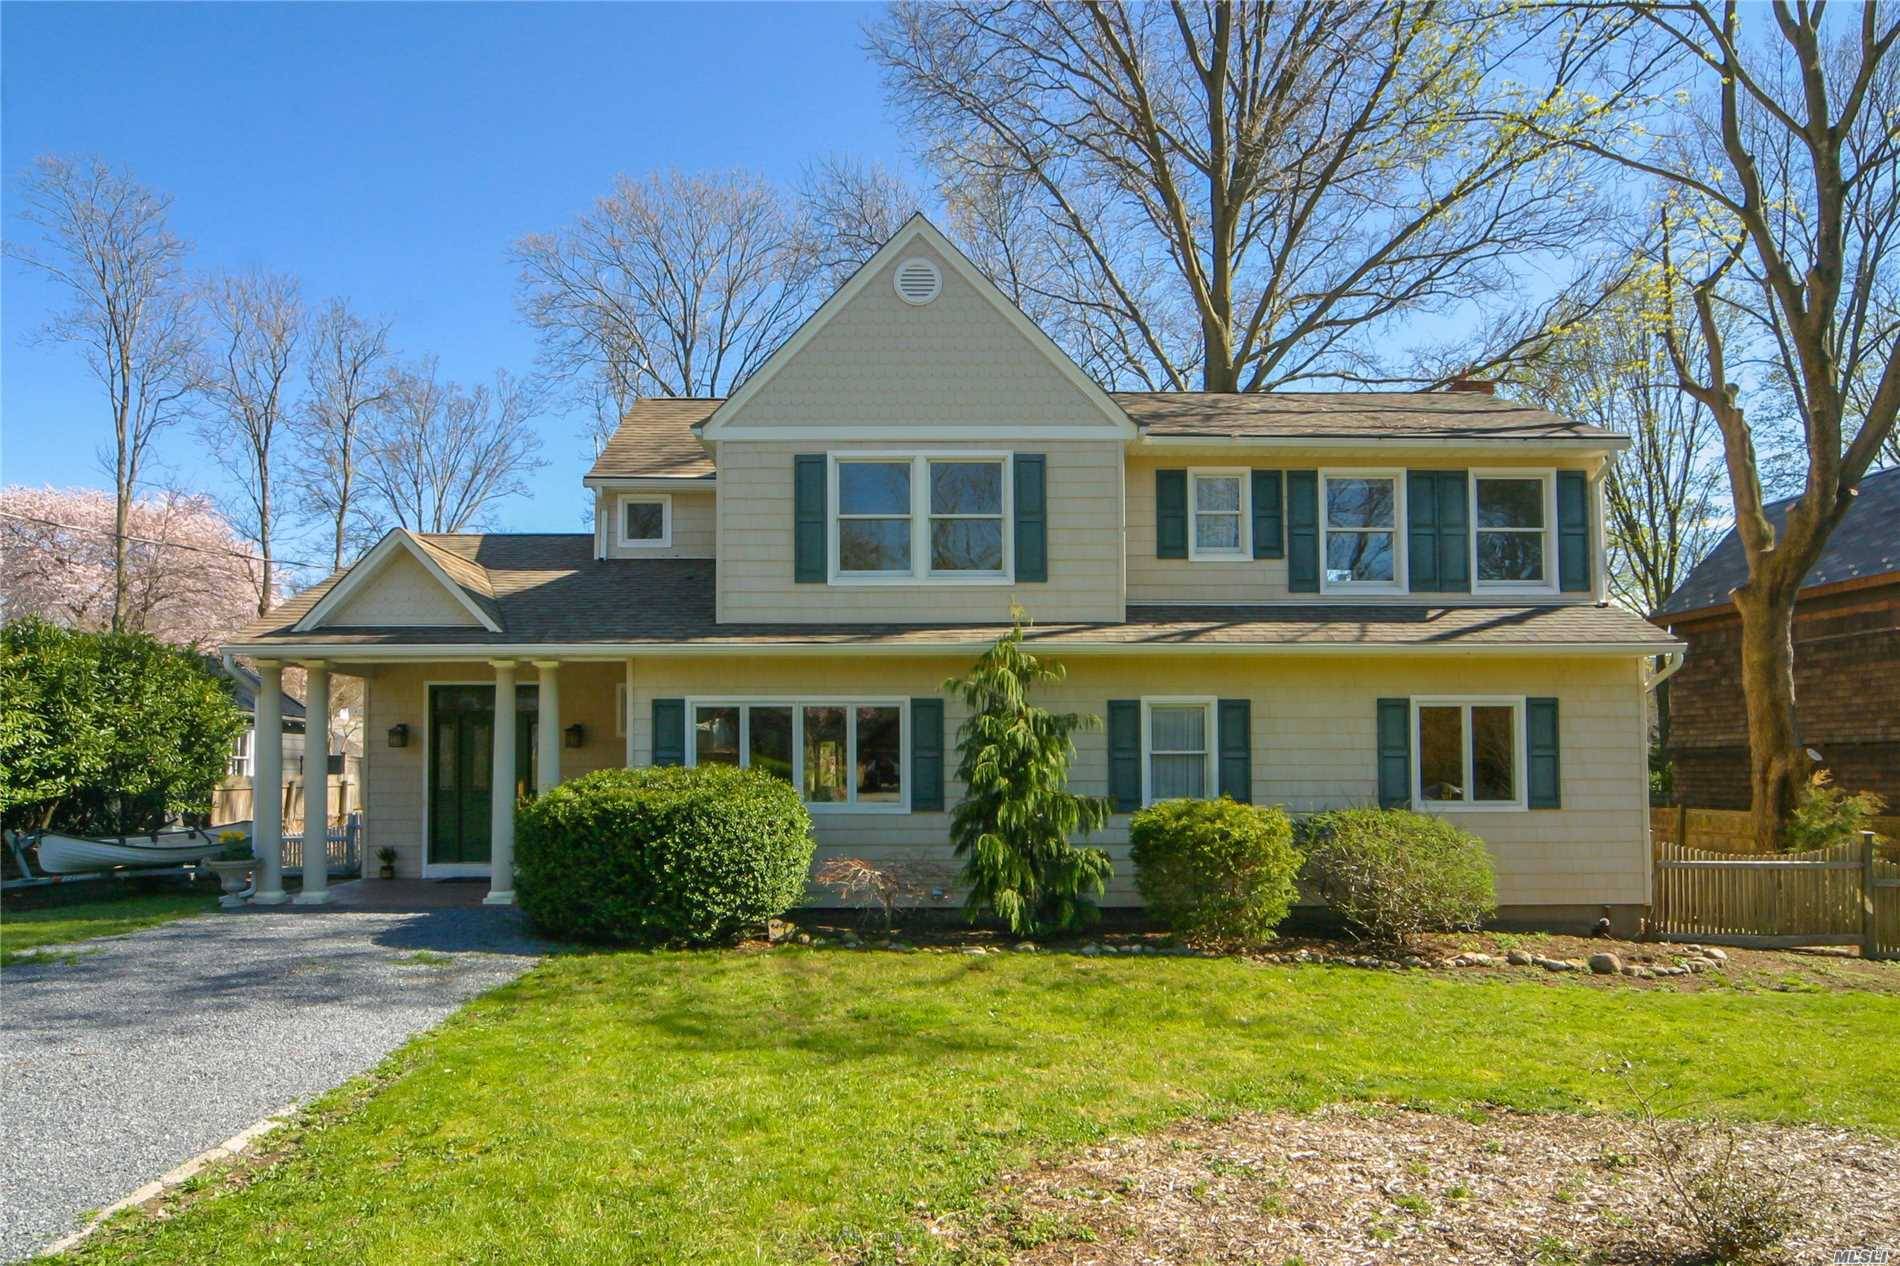 Dy Na Mite Location ! Custom 4 BD, 2 BA Colonial on 1 4 Acre on Little Neck Peninsula.